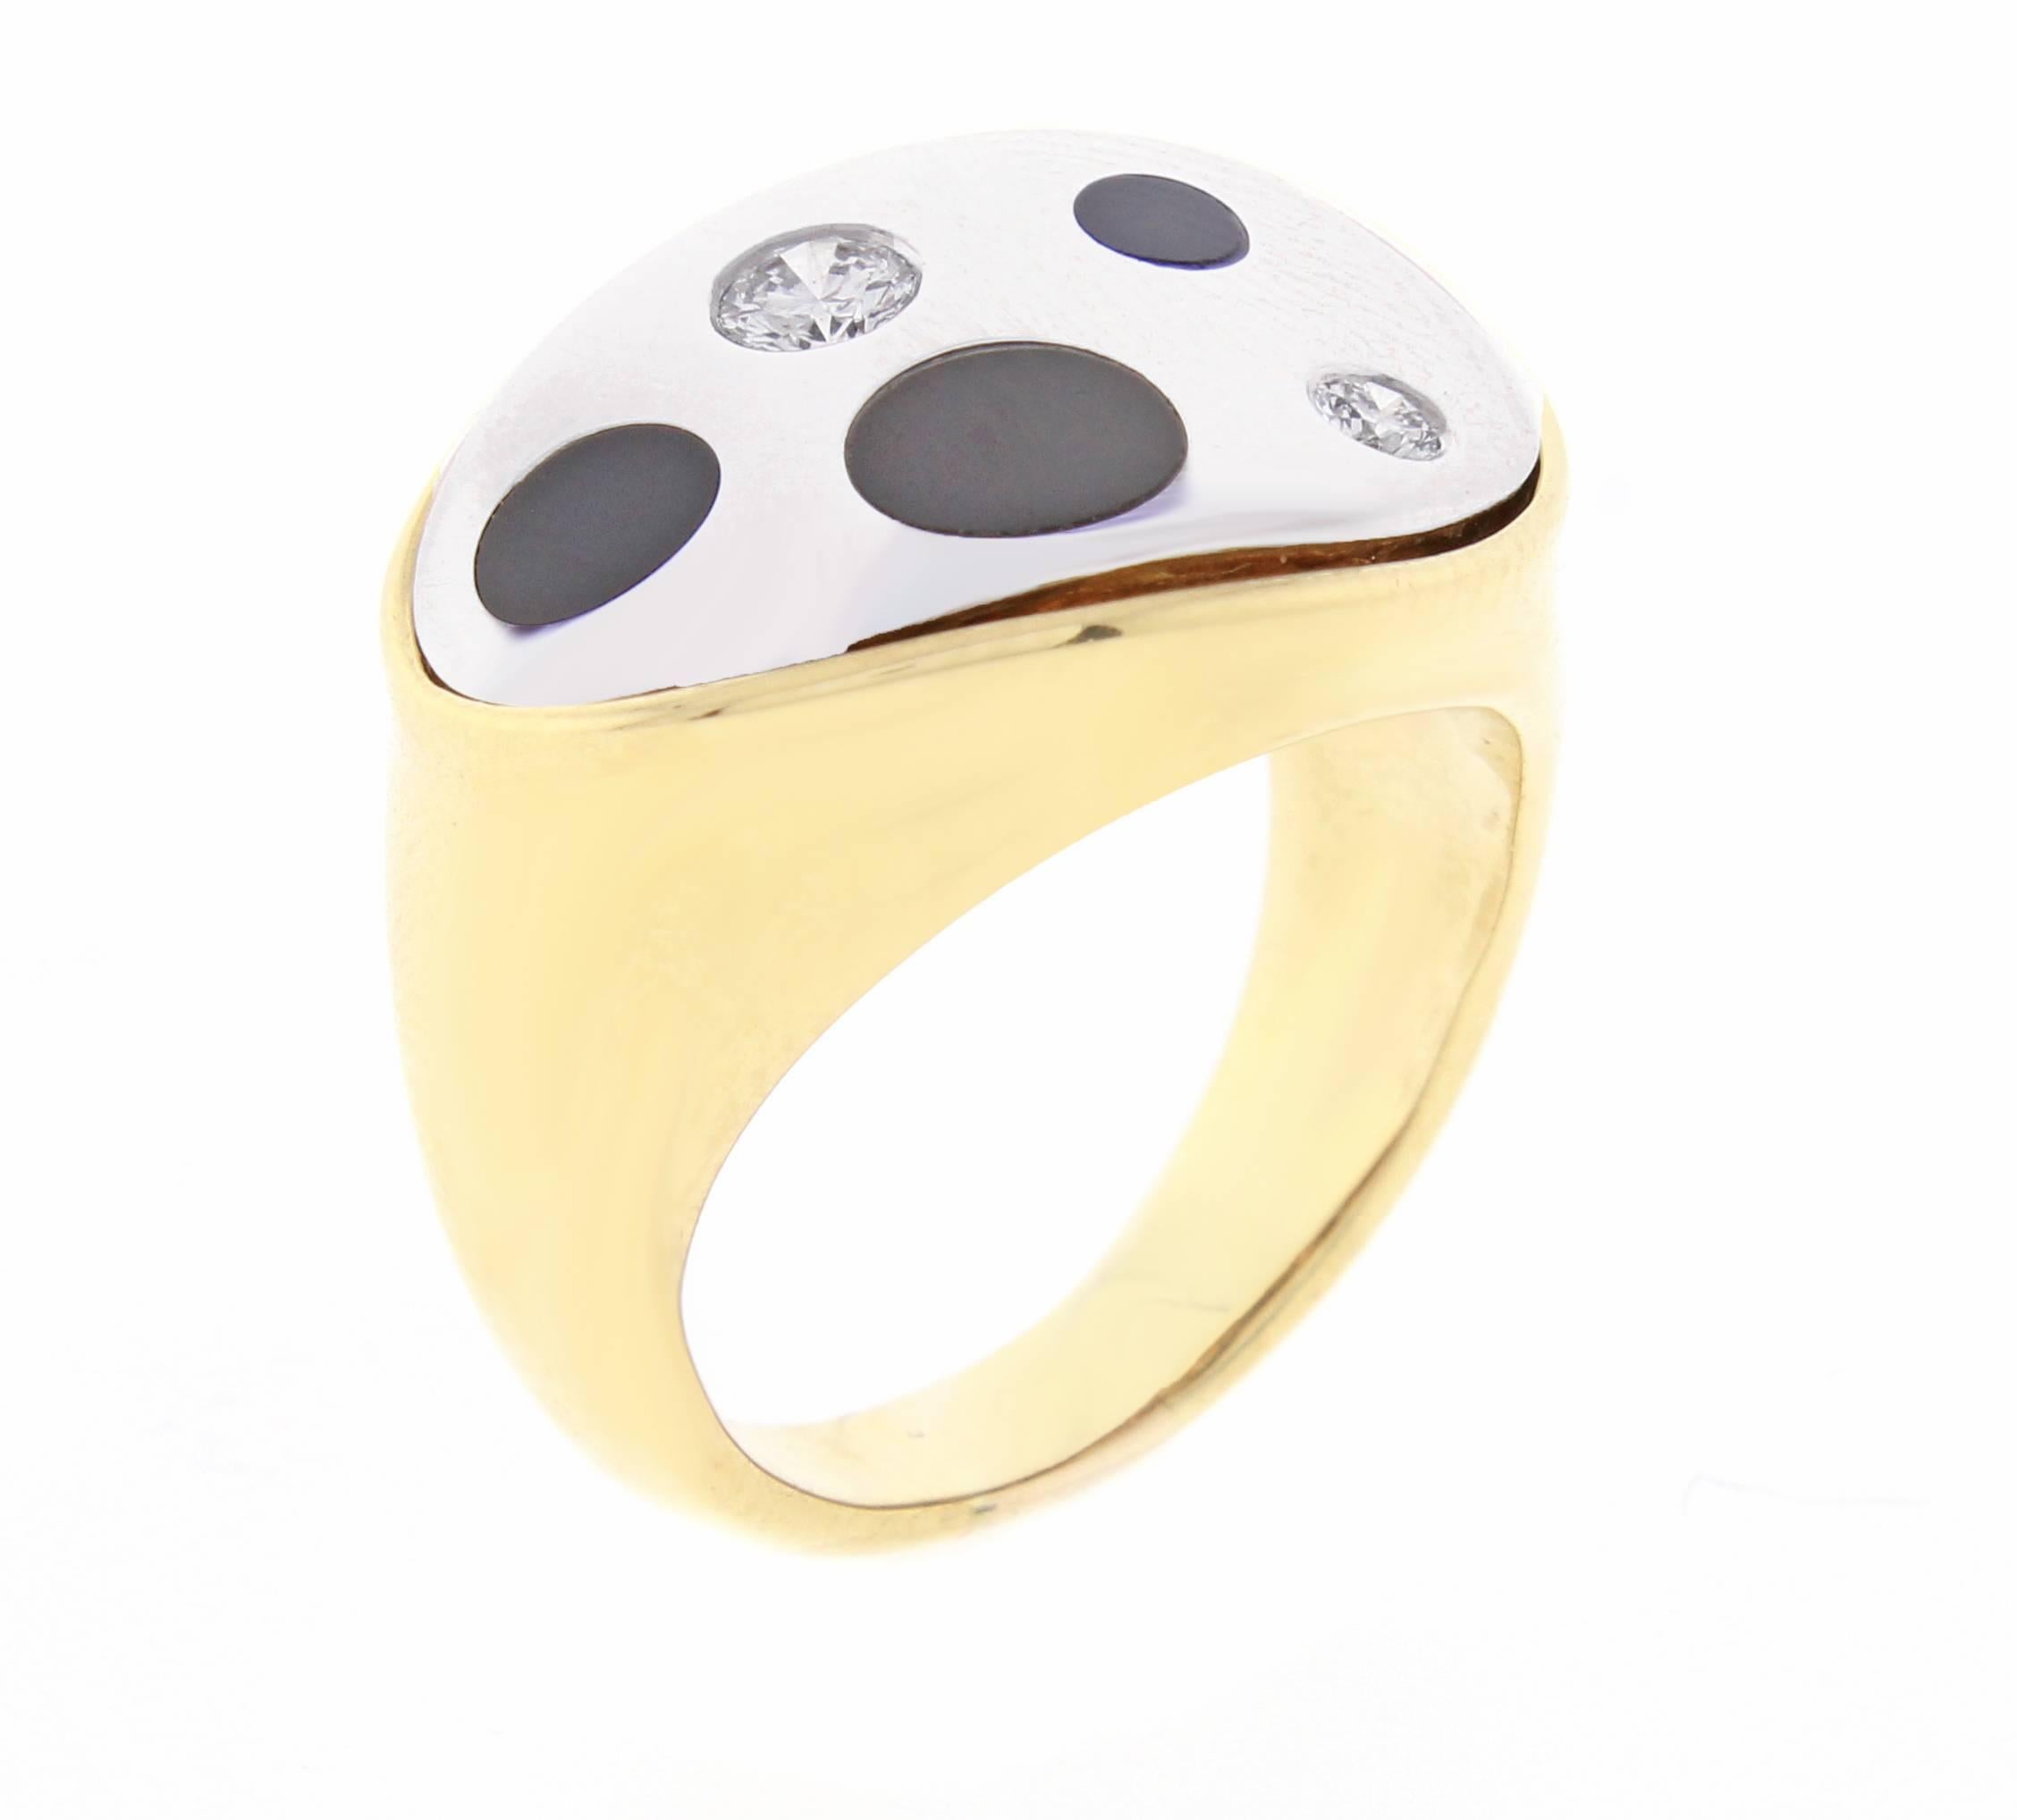 Michael Bondanza jewelry is internationally recognized for its innovative combination of platinum and gold. This ring is part of the polka-dot collection, fusing platinum with 18 karat gold with dots of brilliant diamonds and black onyx.  2 Dia=.24